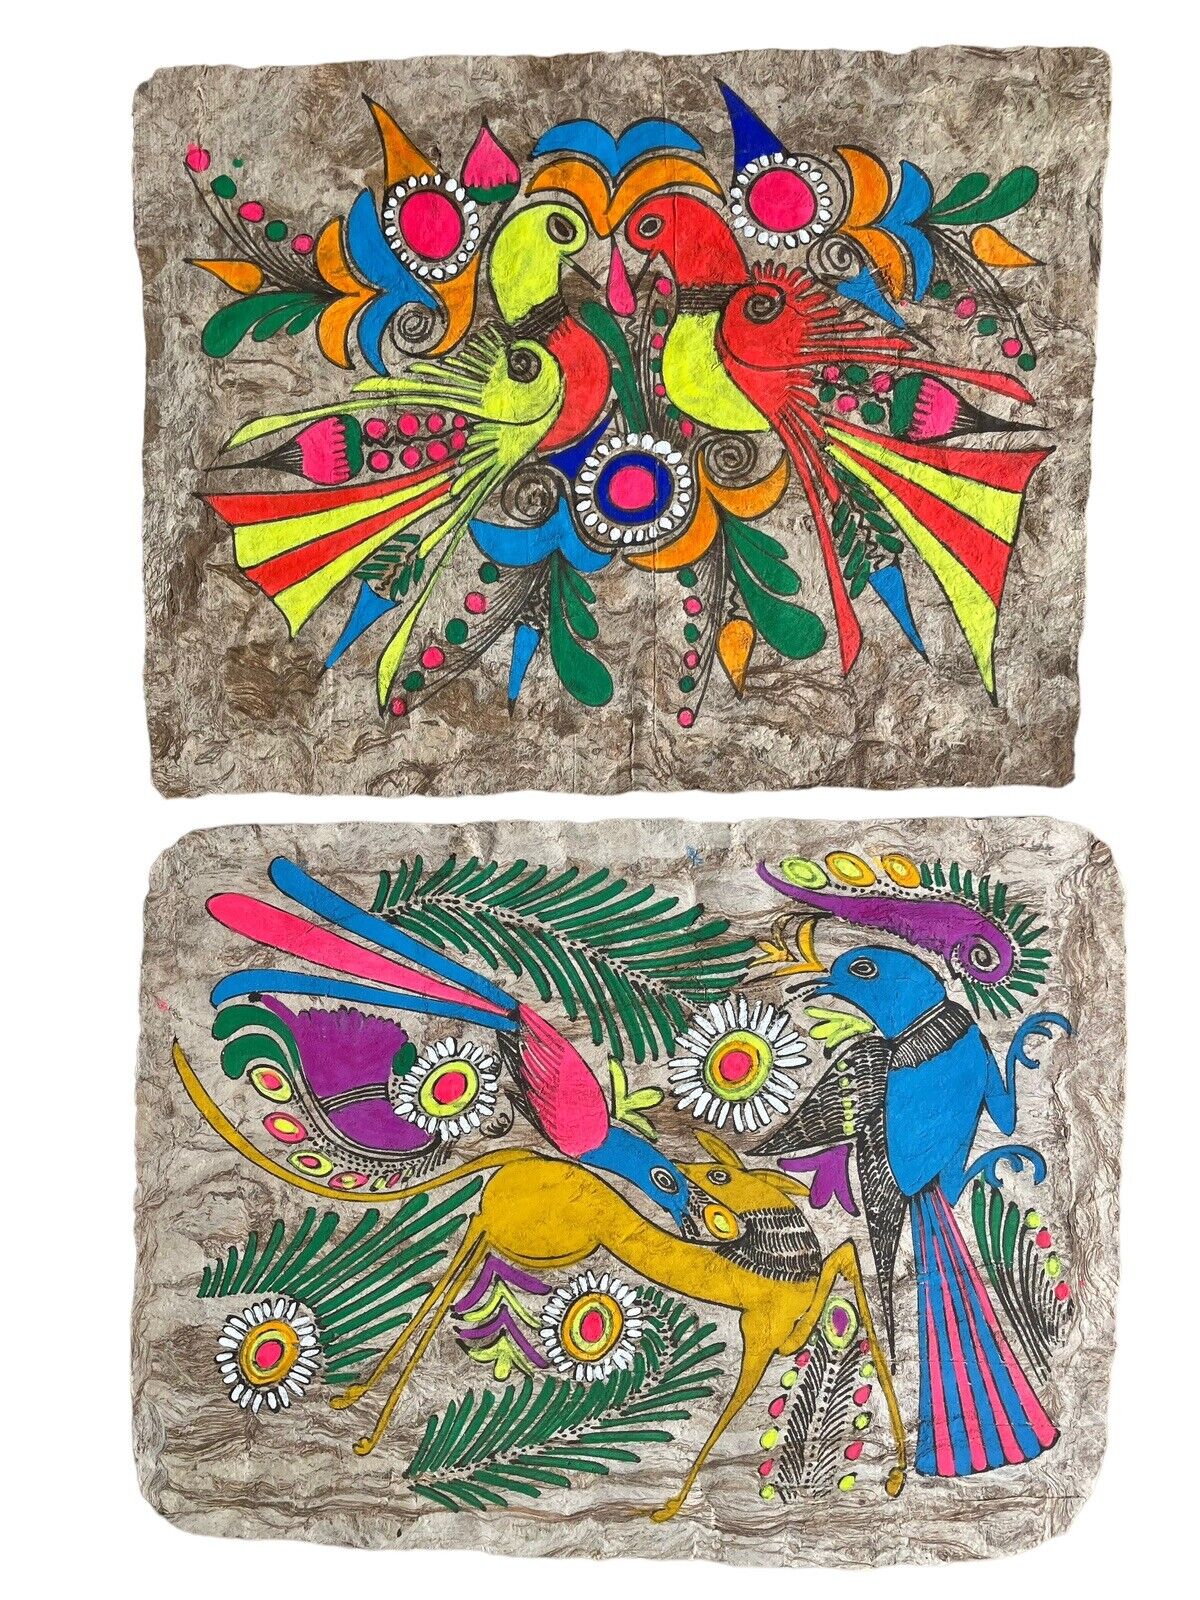 Vintage Mexico Paintings Bright Colorful Birds Mexican Folk Art Bark Paper.